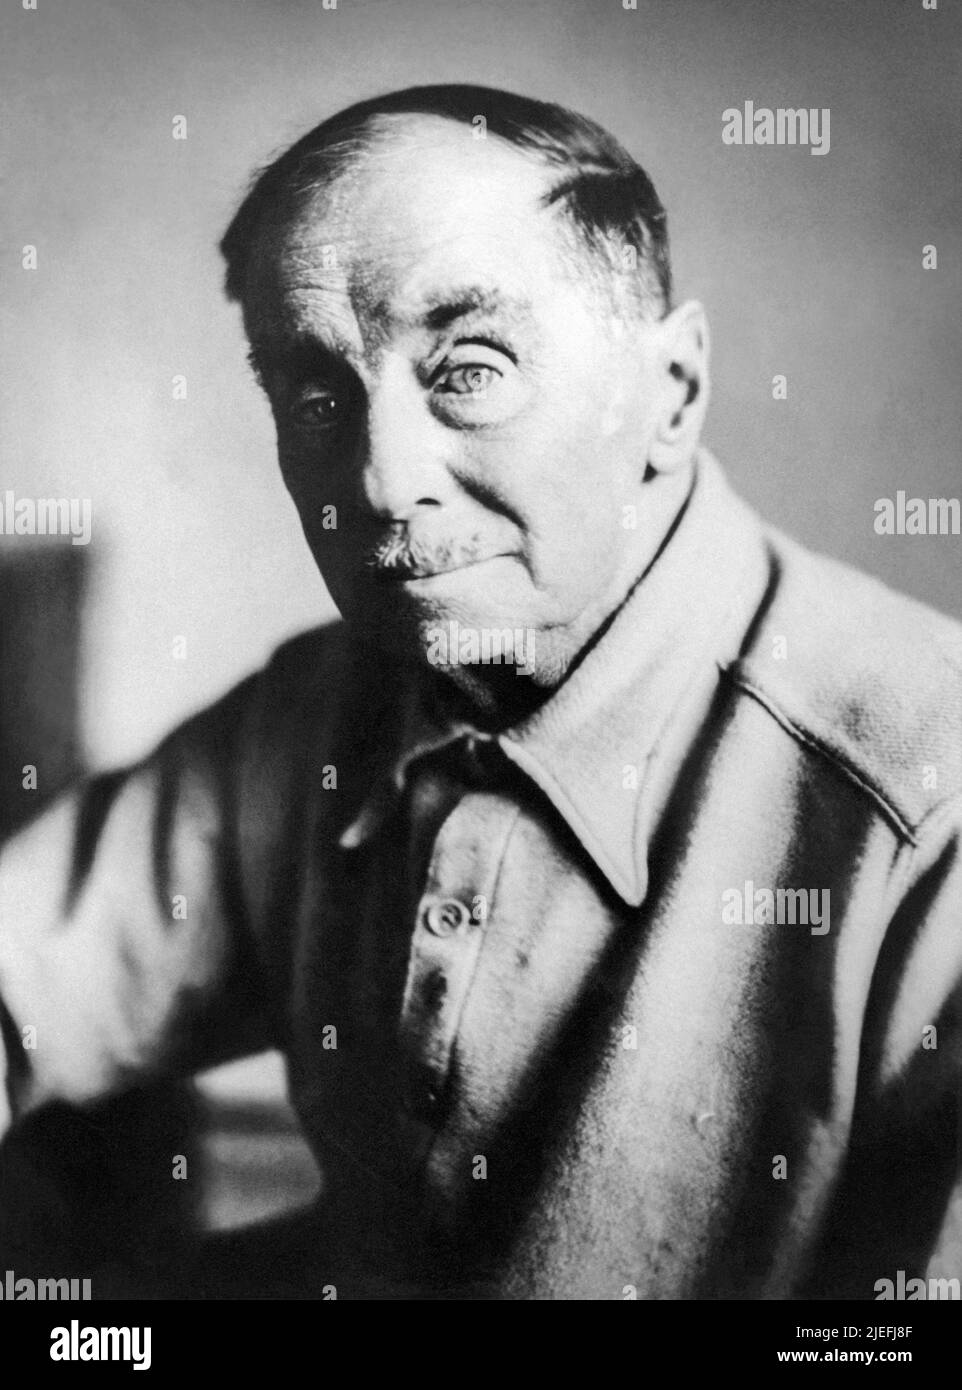 H.G. Wells (1866-1946), British author of science fiction classics The War of the Worlds, The Invisible Man, The Time Machine, and The Island of Dr. Moreau. (Photo: 1944) Stock Photo